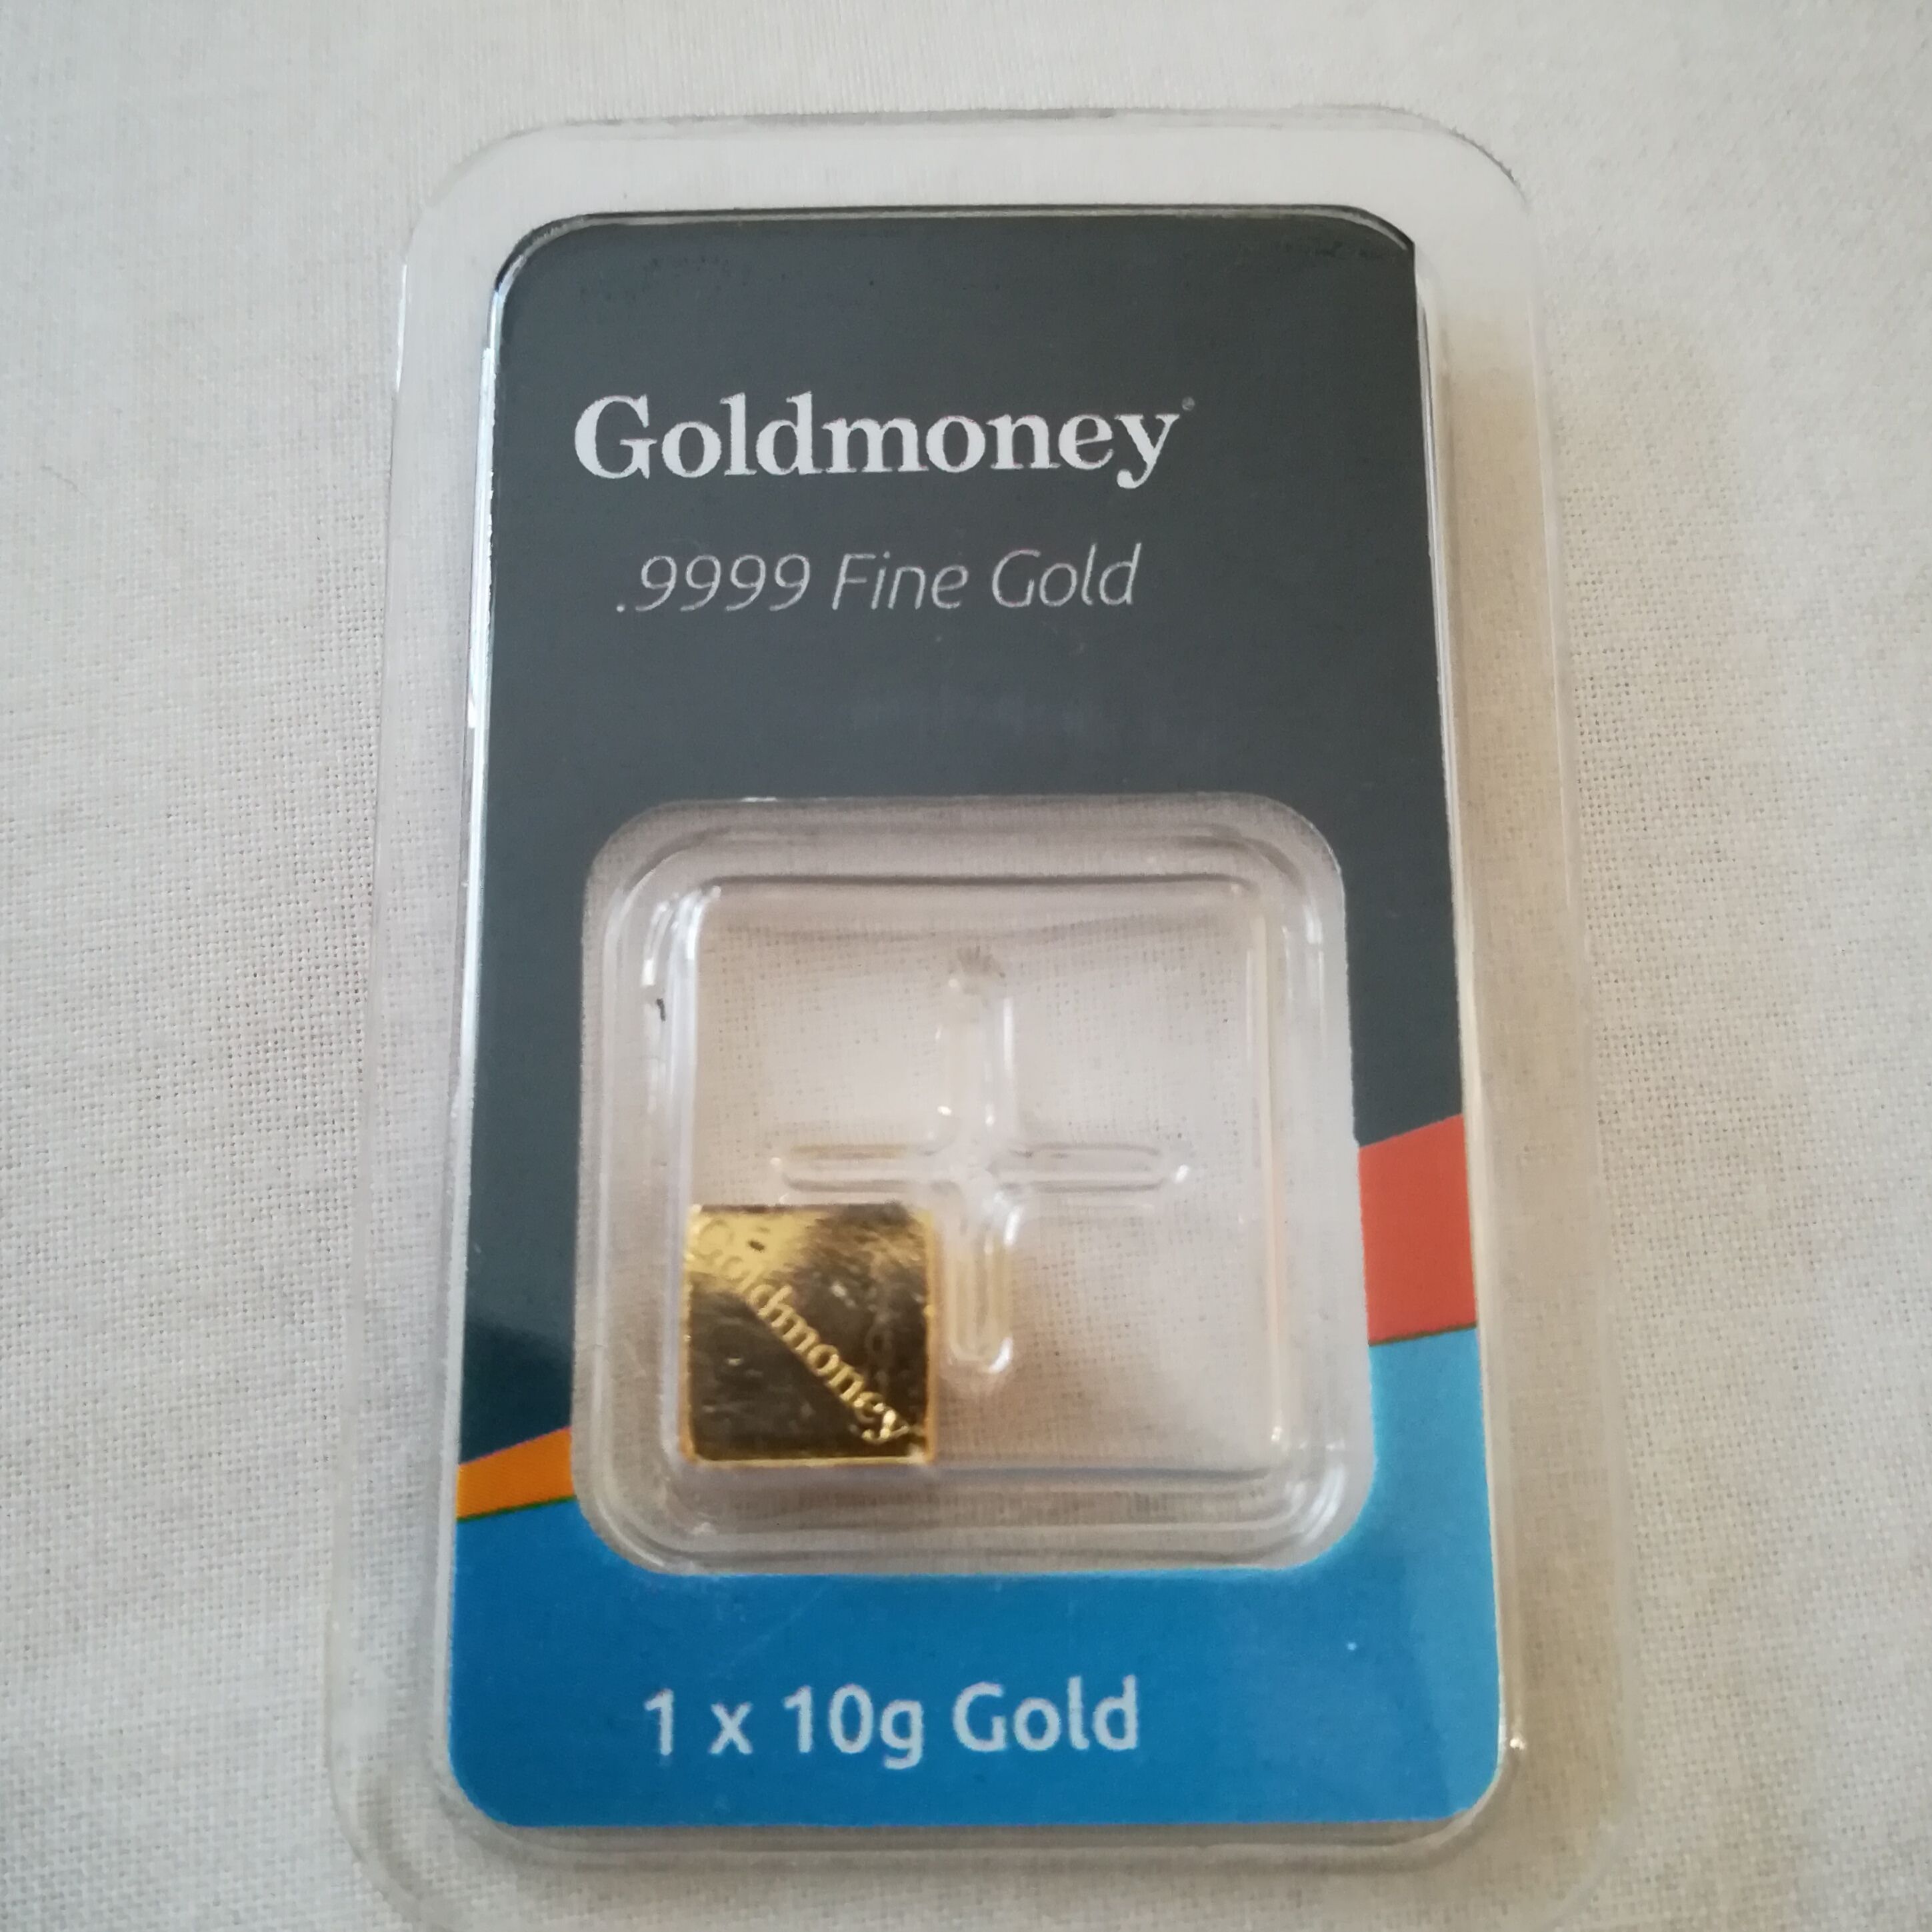 moneyworks gold 7 review